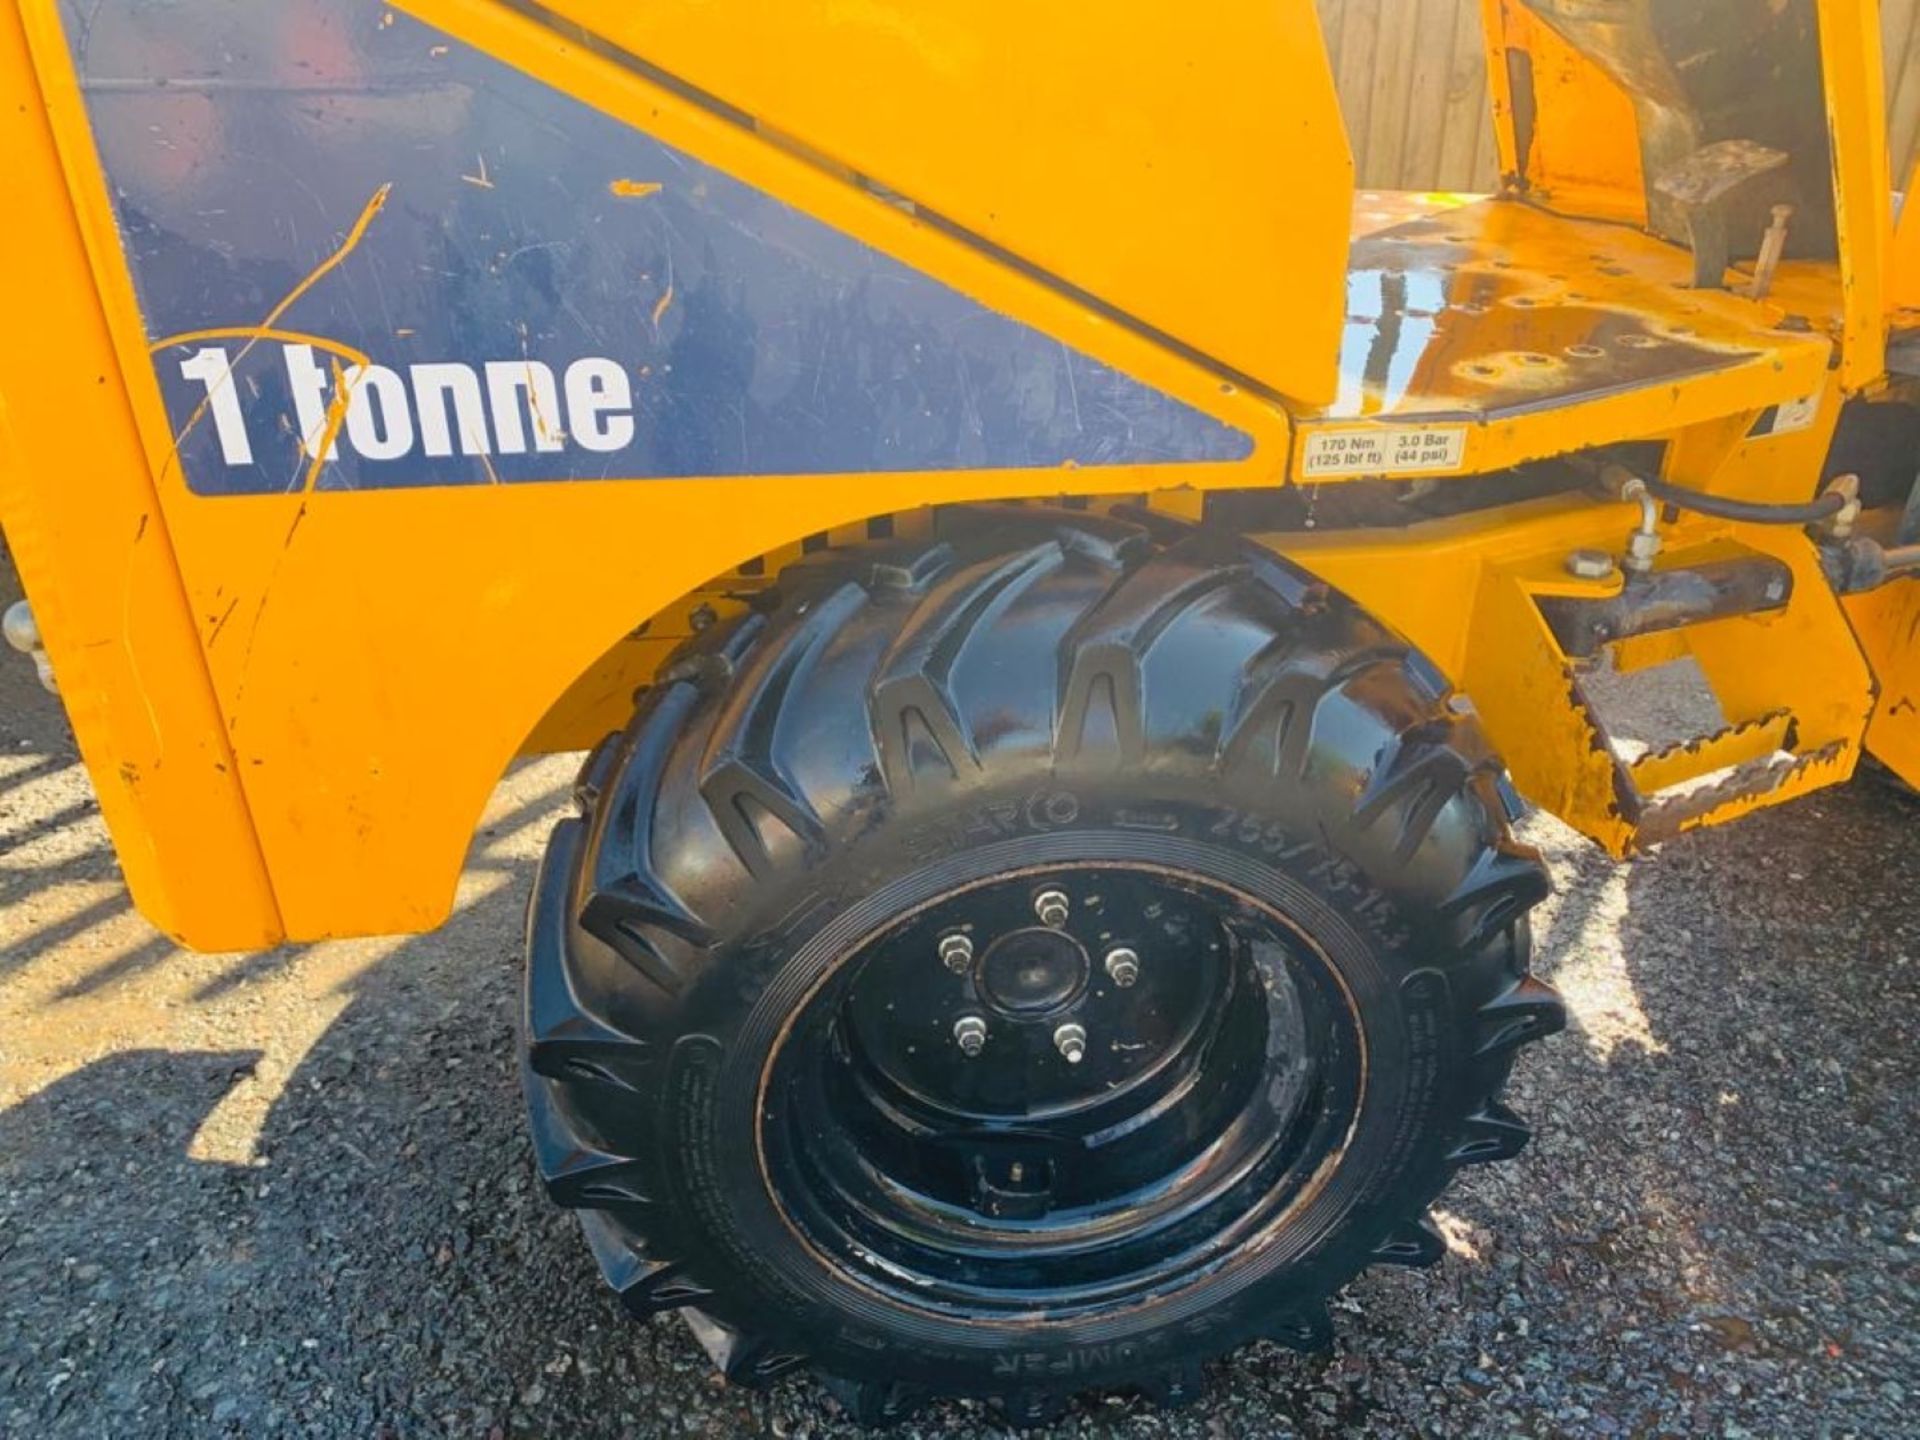 THWAITES MACH 201 1 TONNE HIGH TIP DUMPER, YEAR 2013, 1405 HOURS, HYDROSTATIC DRIVE, GOOD TYRES - Image 7 of 12